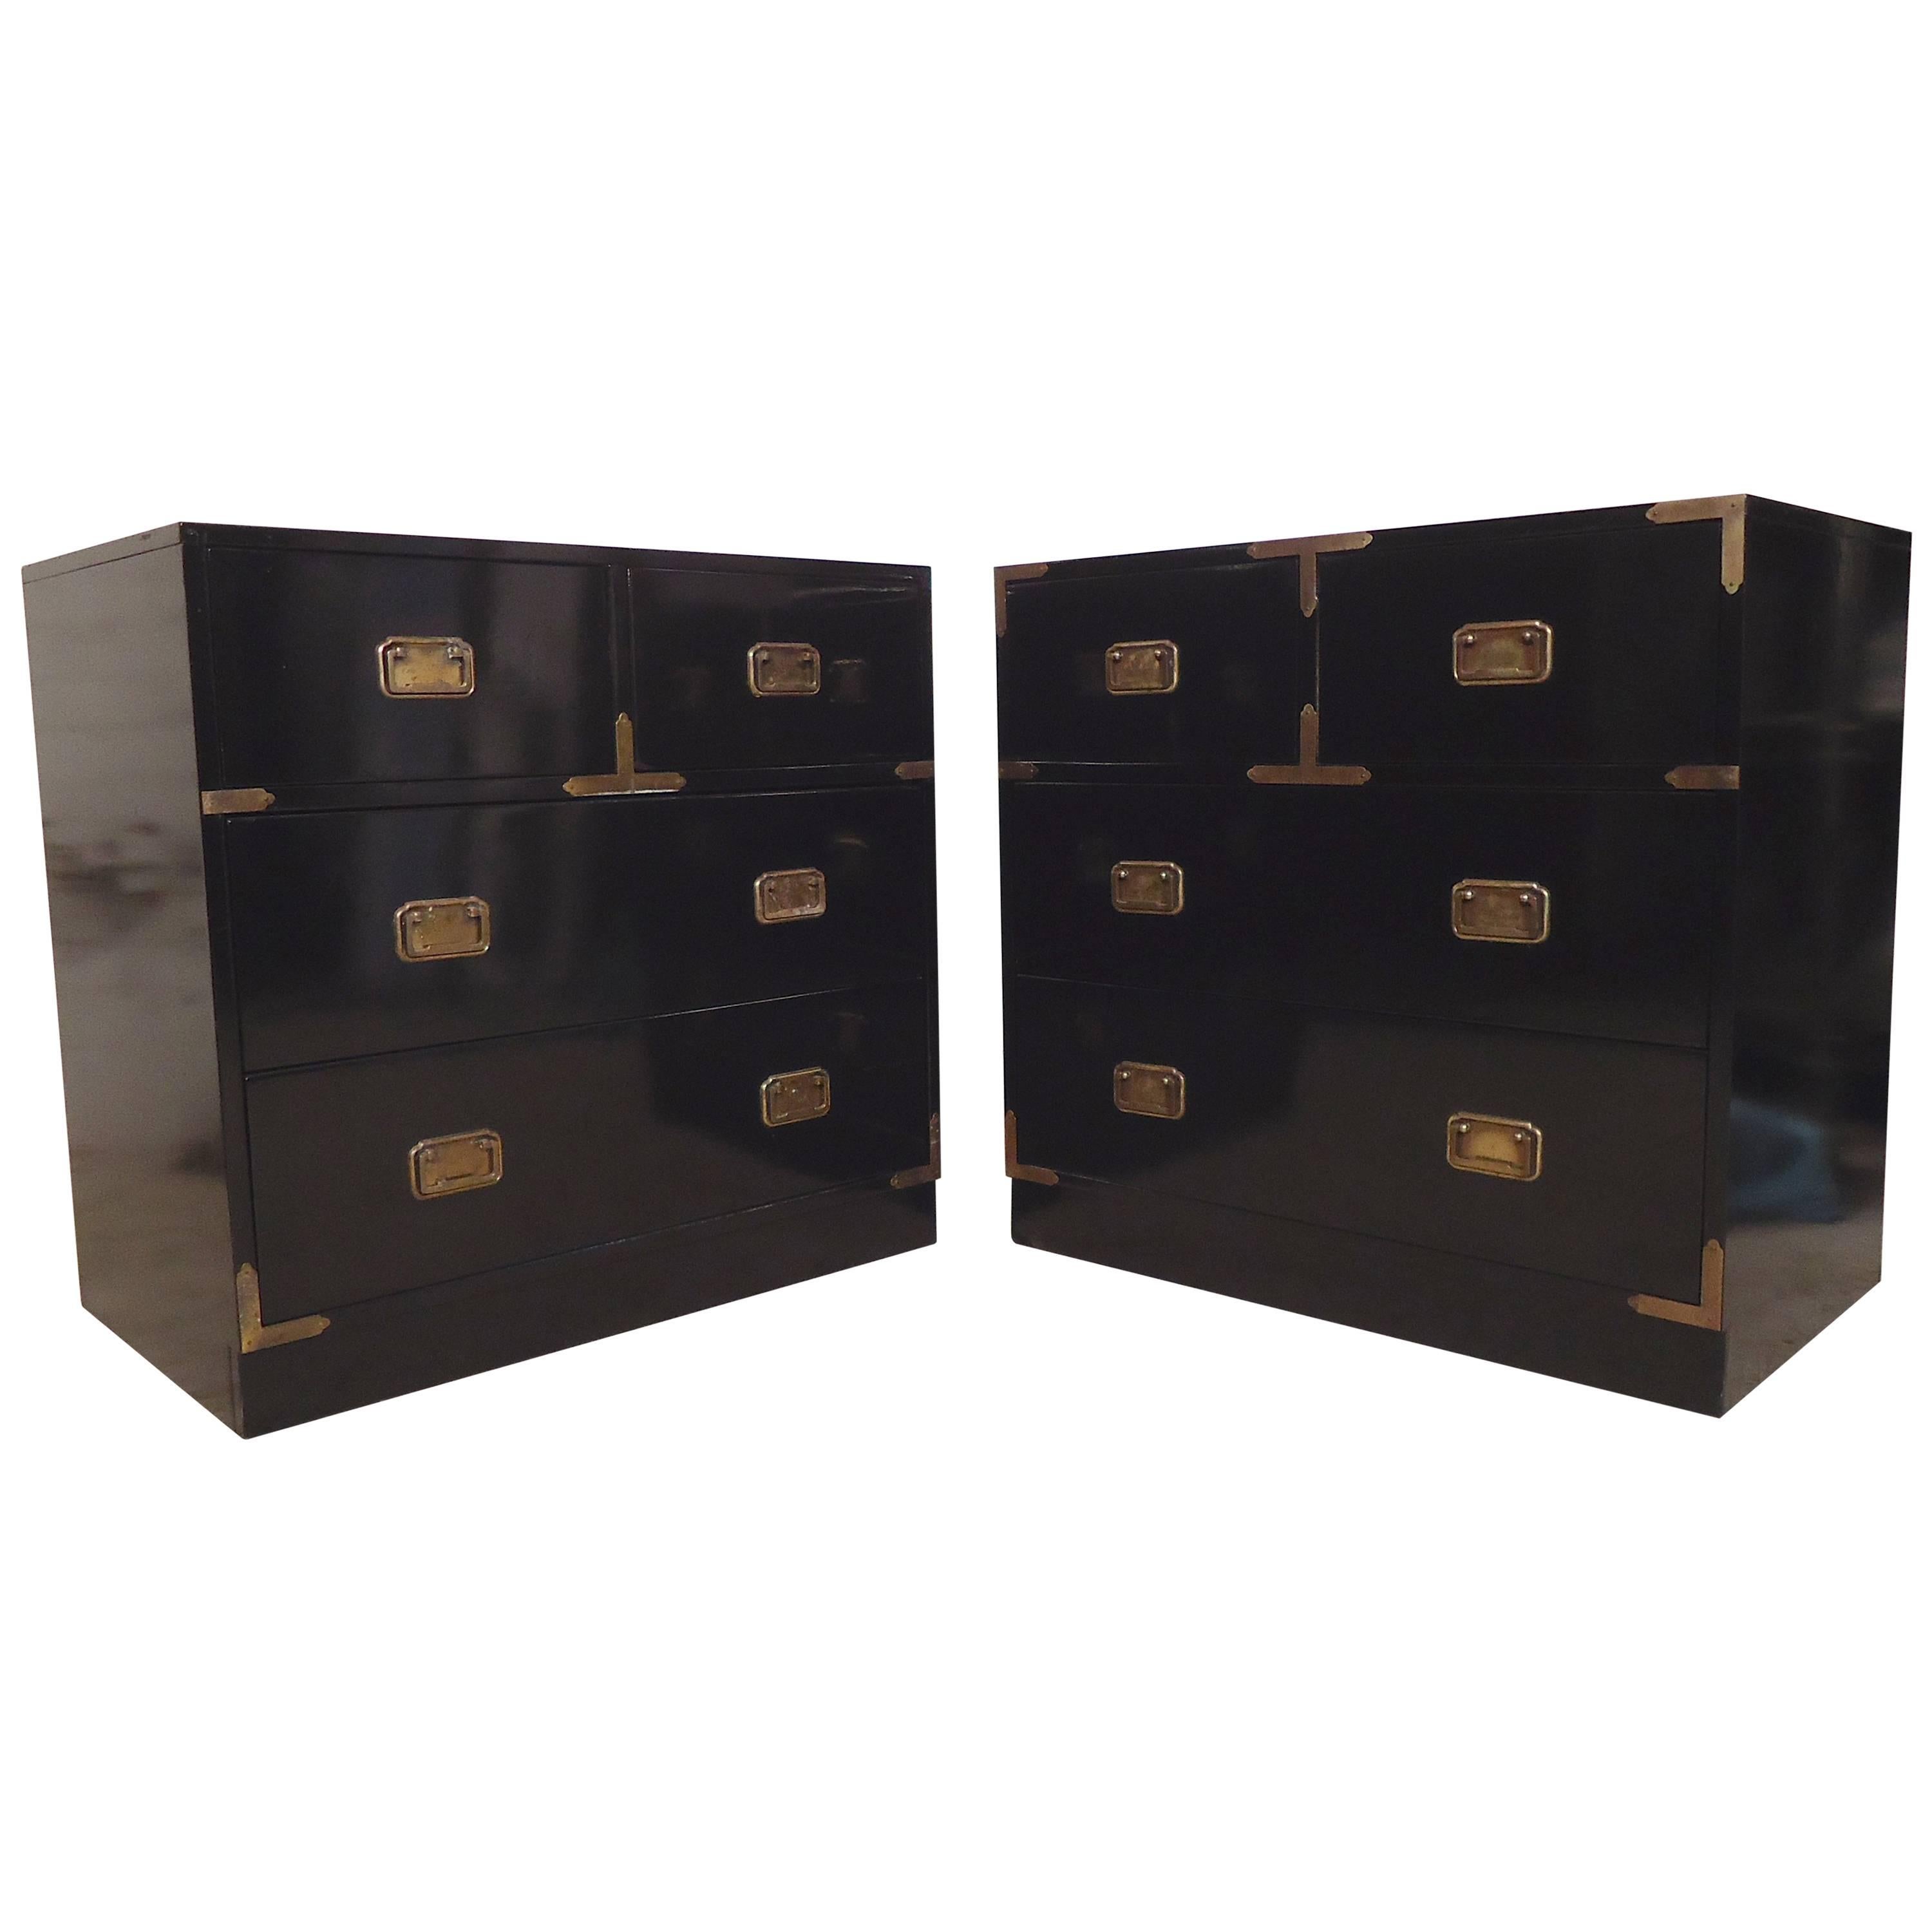 Pair of Vintage Campaign Chests